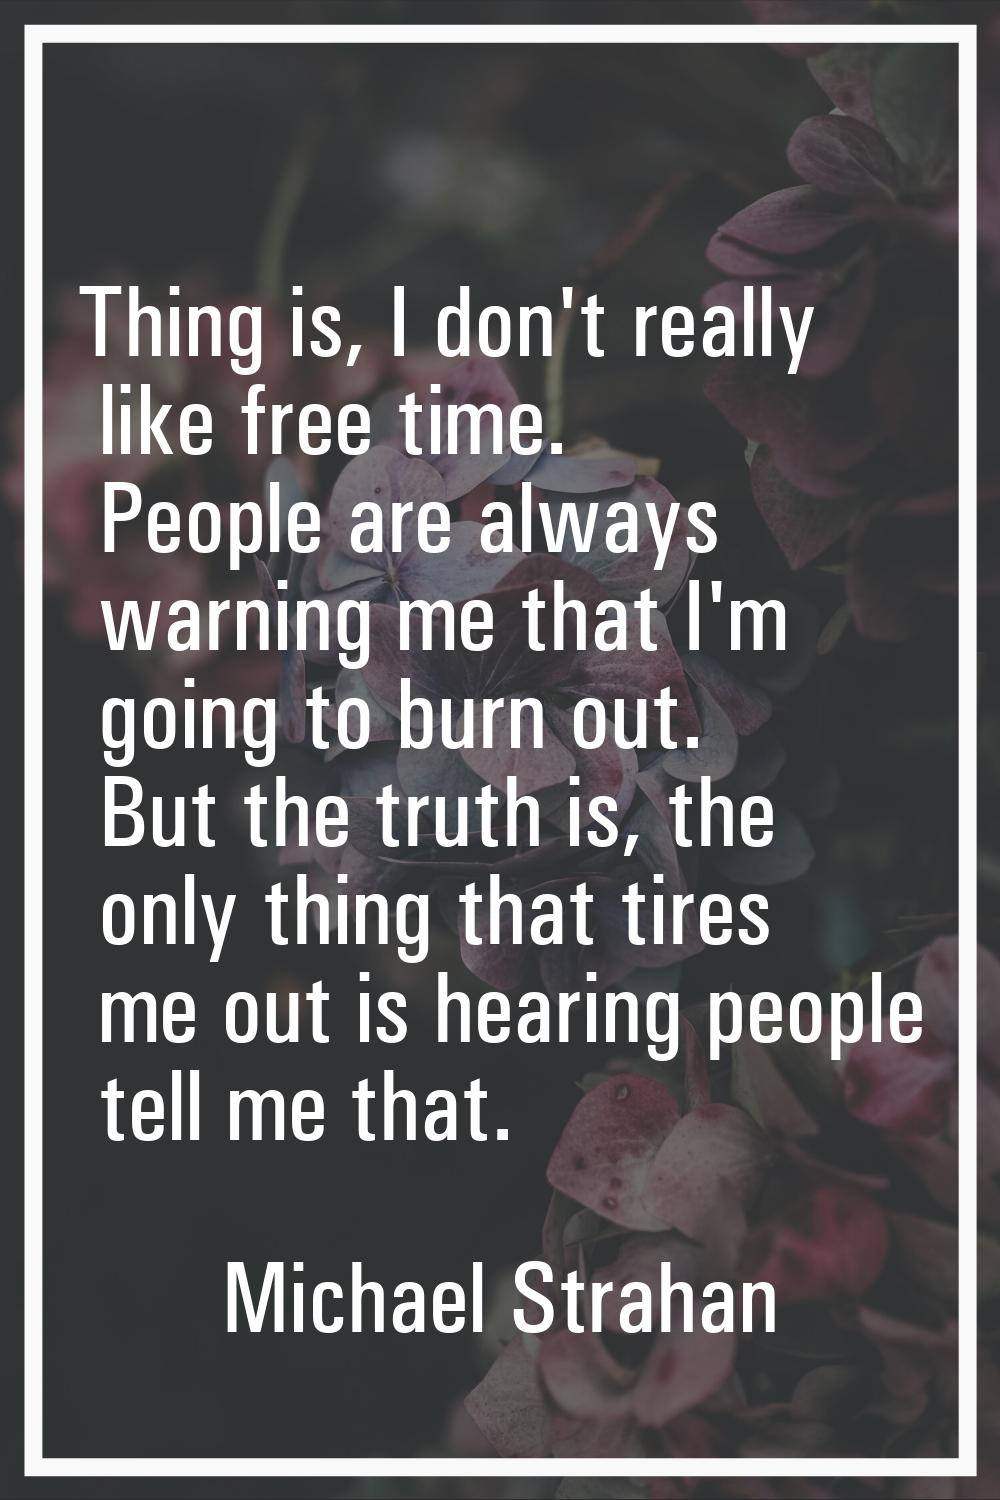 Thing is, I don't really like free time. People are always warning me that I'm going to burn out. B